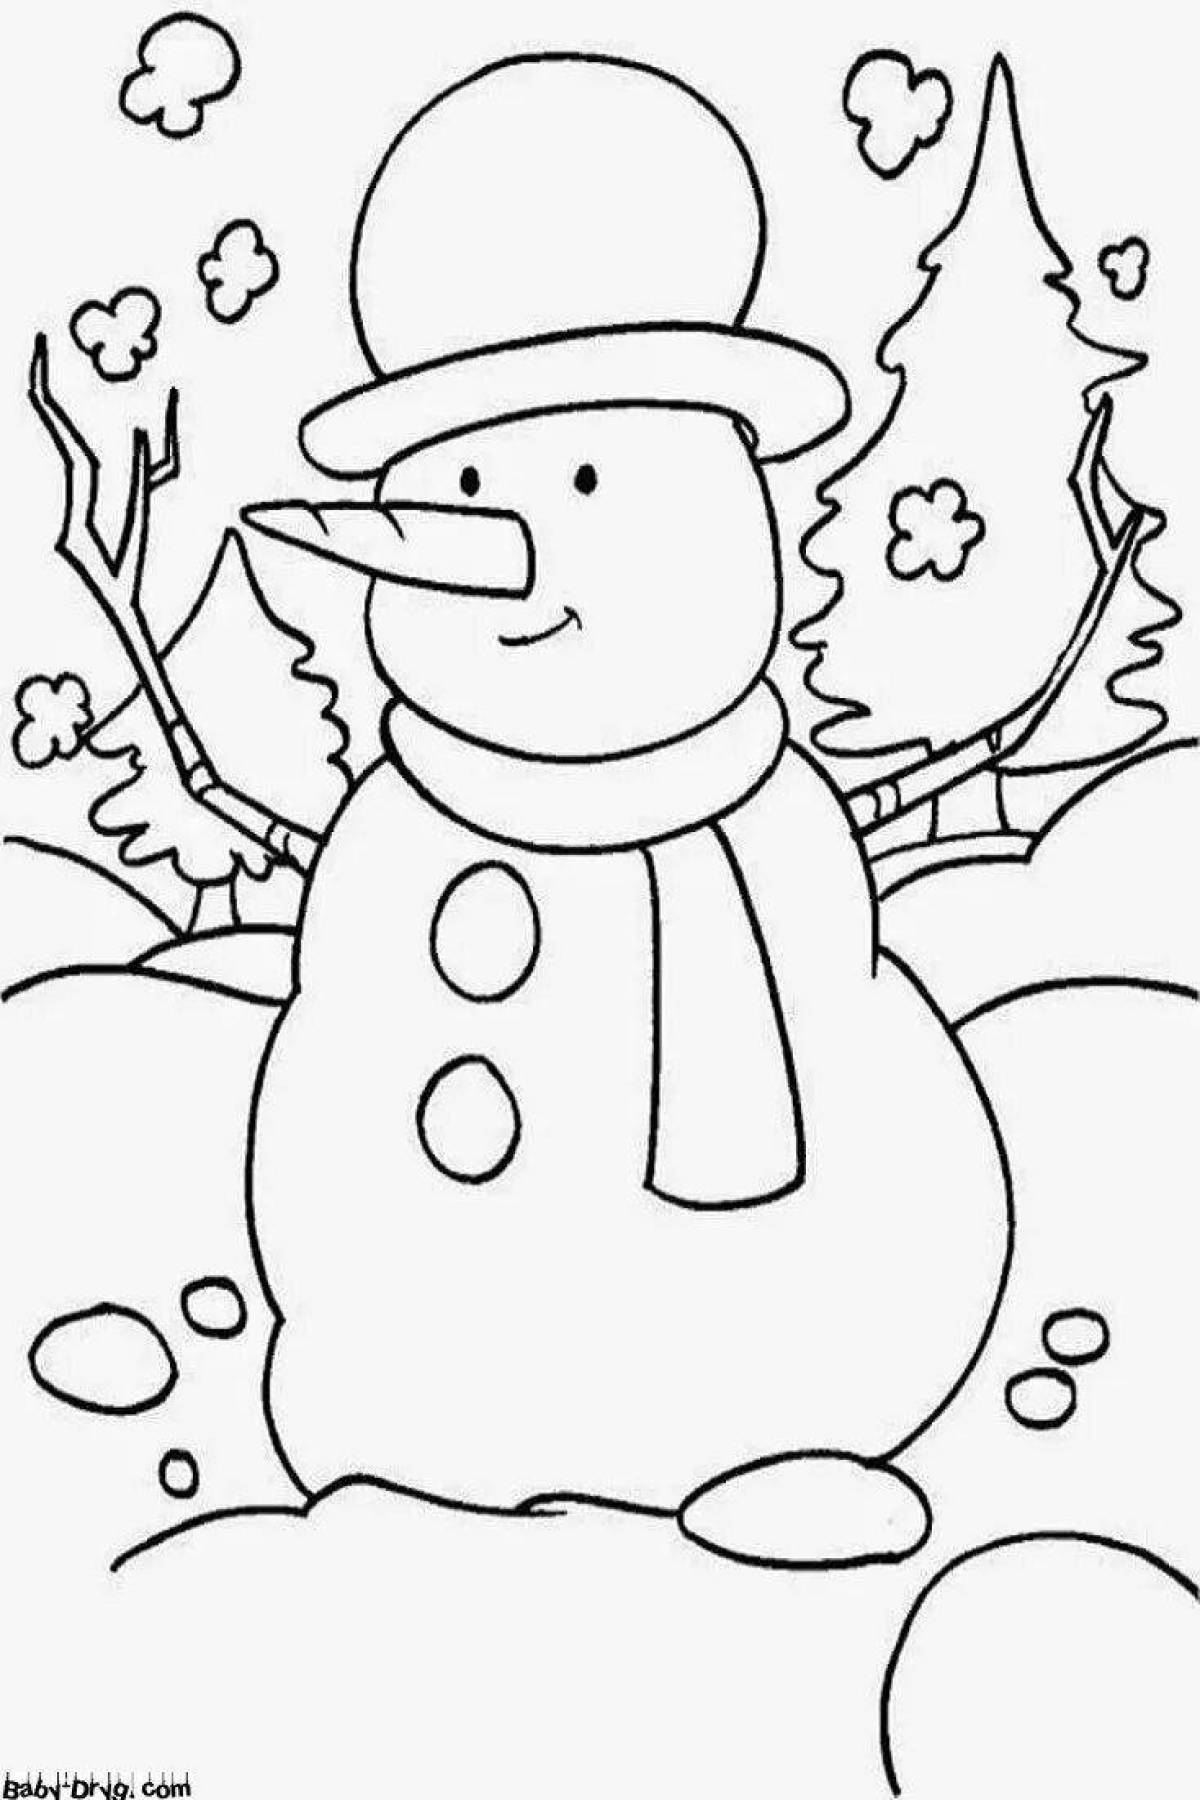 Outstanding akala coloring page for beginners